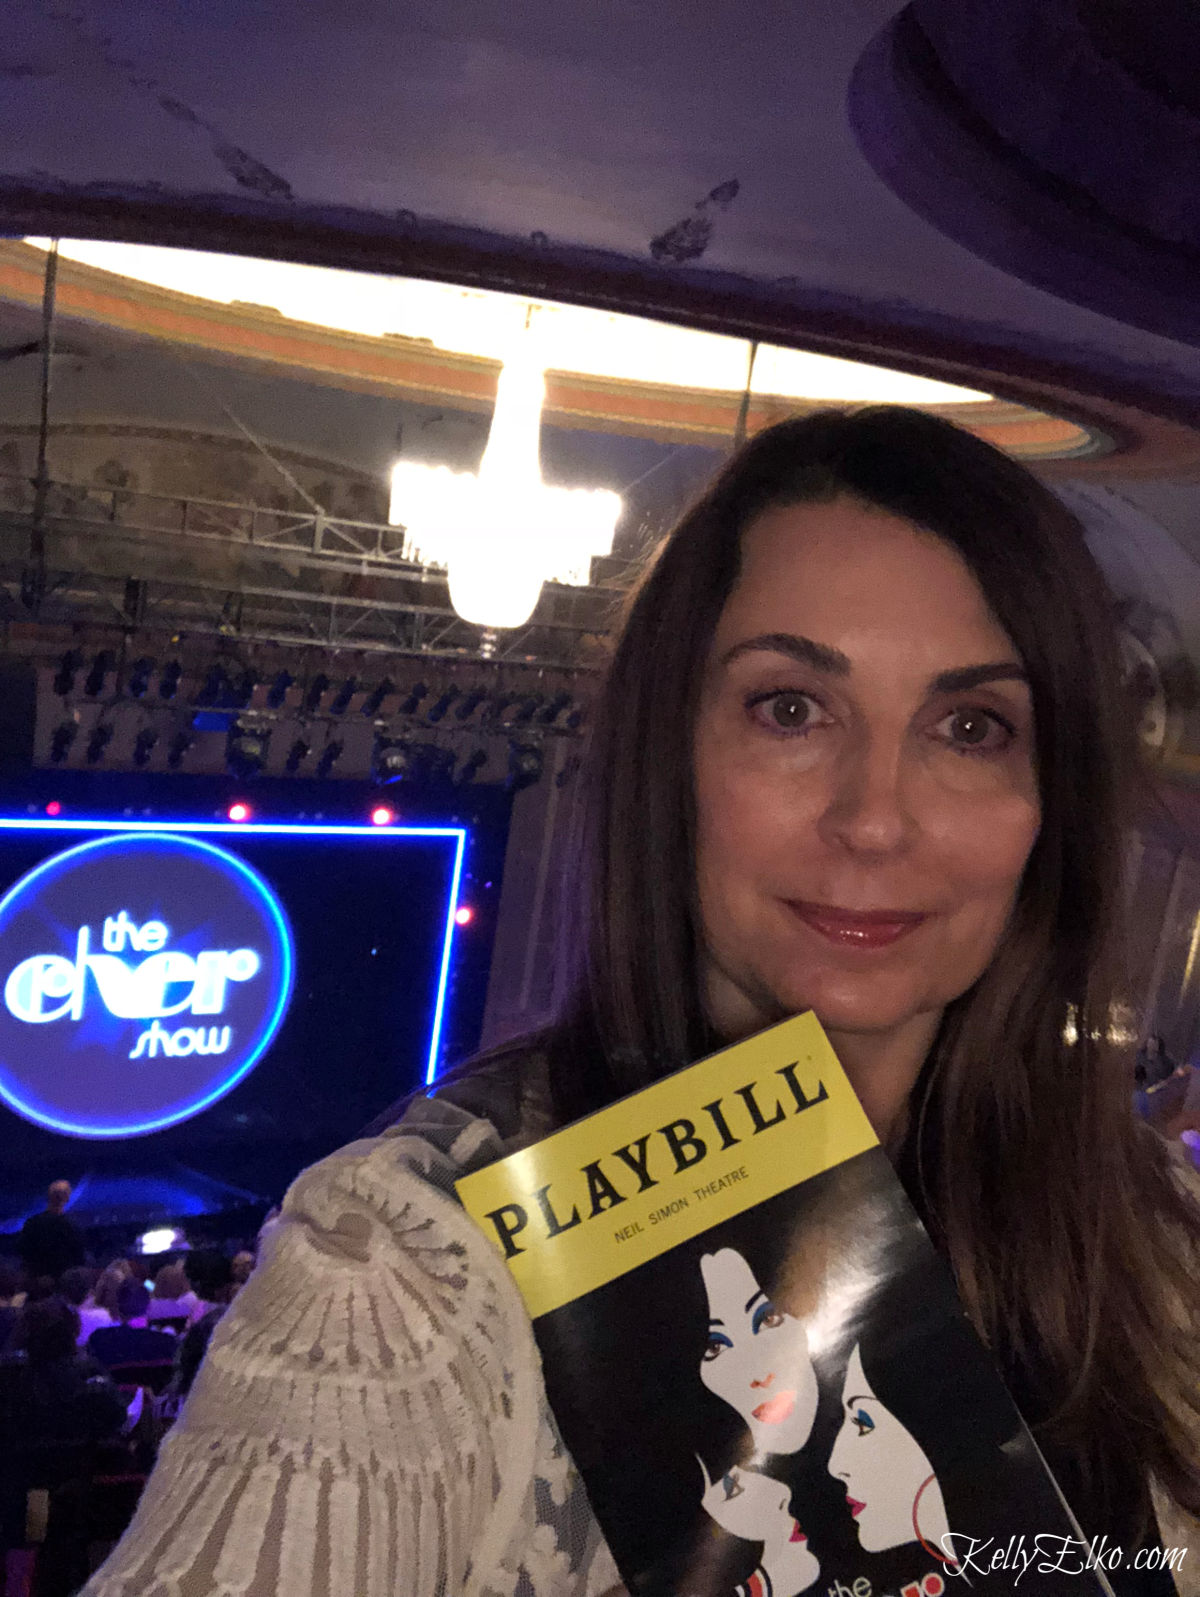 52 Weeks of Yes! Take a girls trip to see Cher on Broadway kellyelko.com #broadway #52weeksofyes #cher #nyc #iloveny